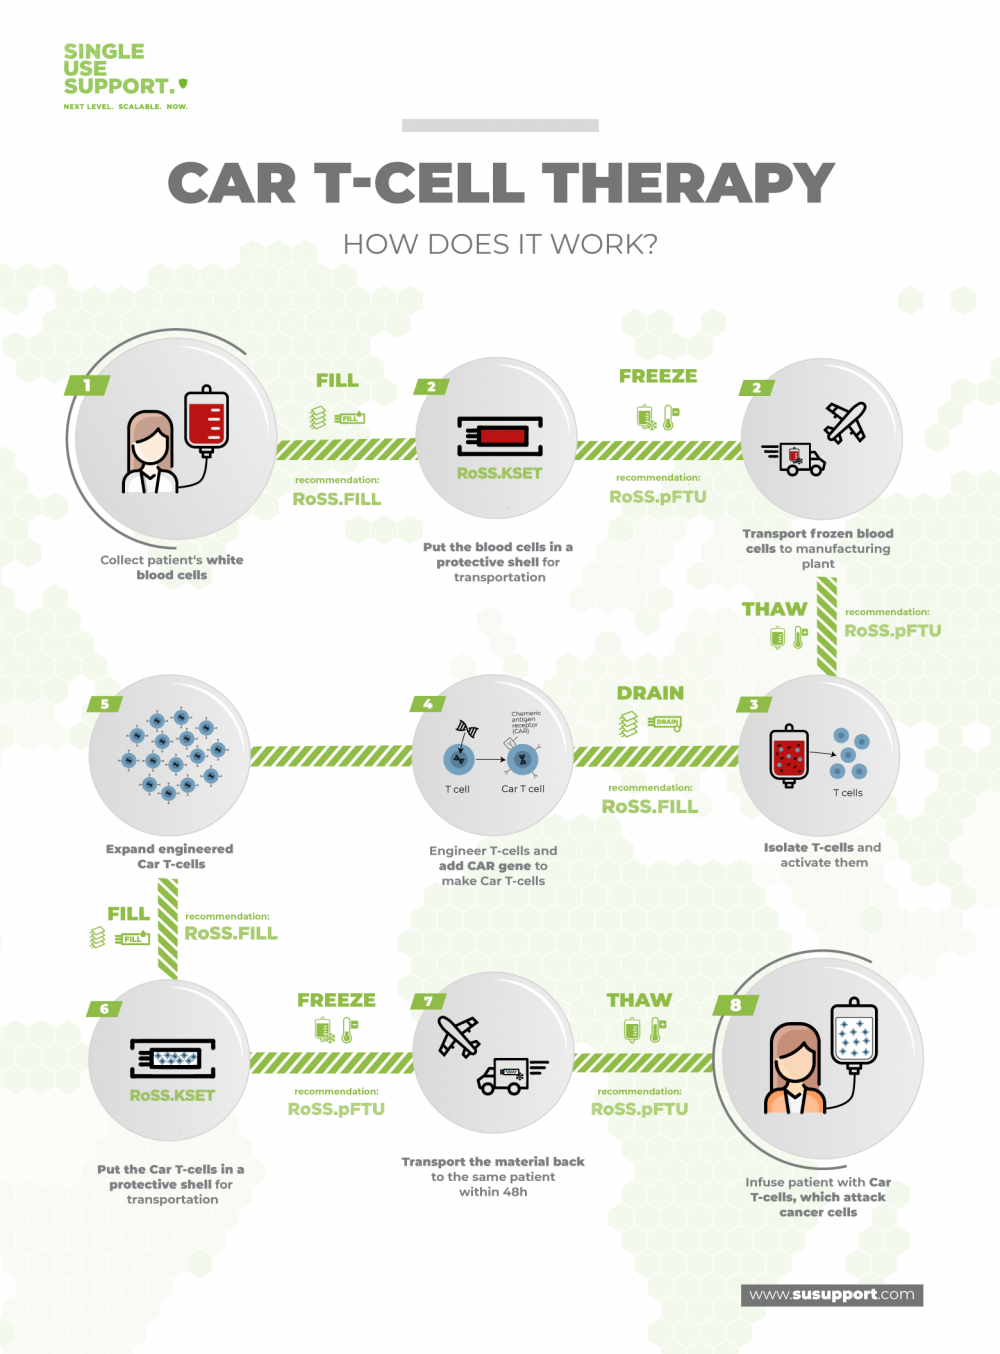 Safe transport in cell & gene therapies